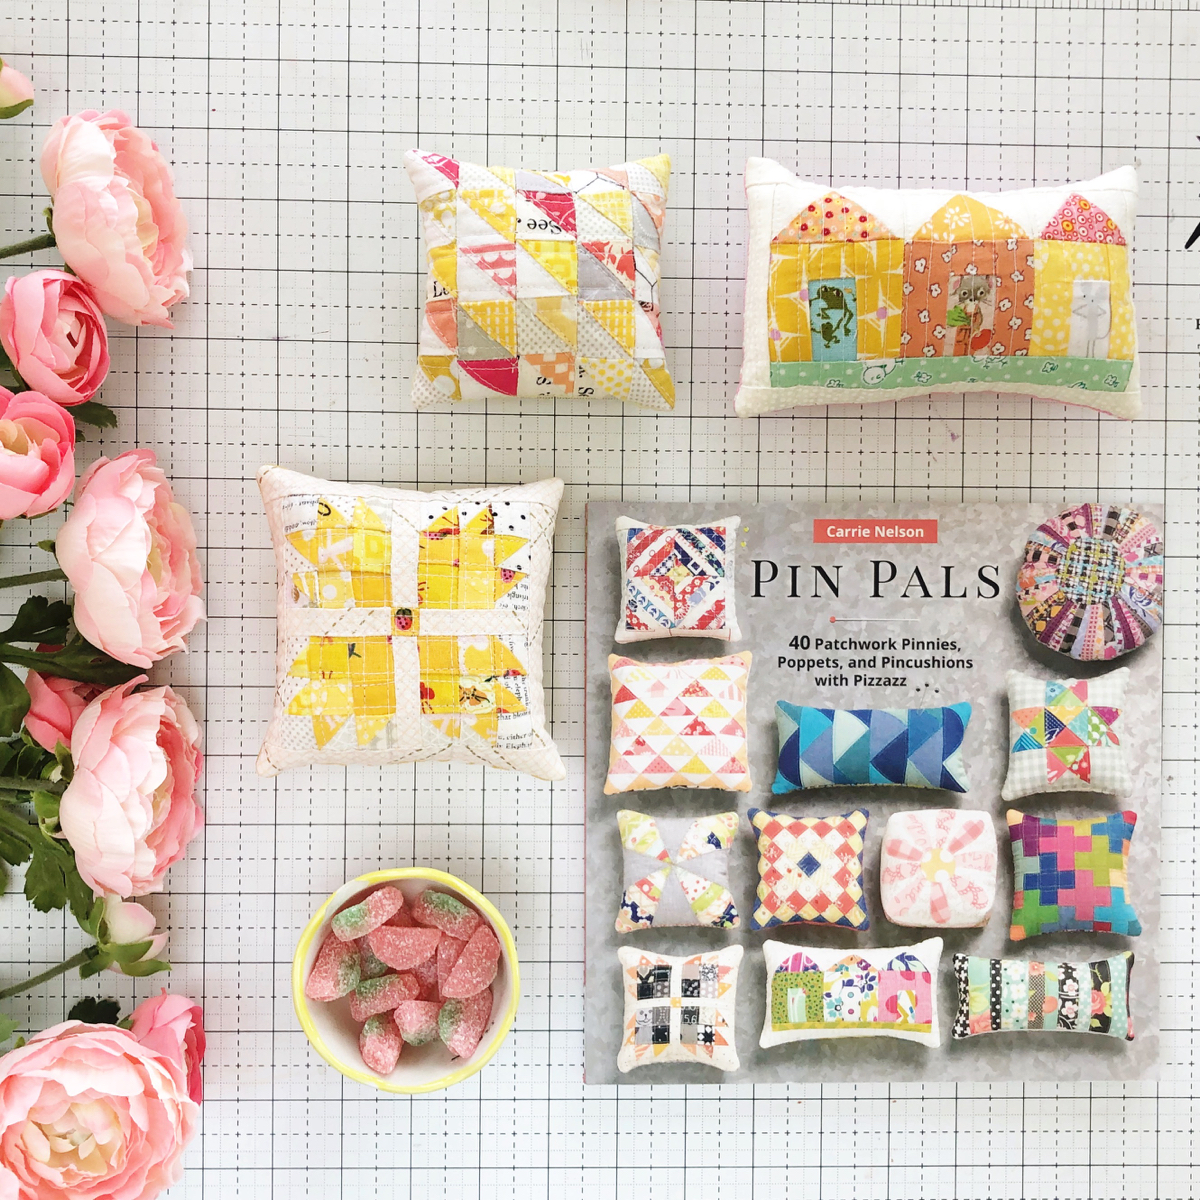 Patchwork Pincushions from Pin Pals by Carrie Nelson